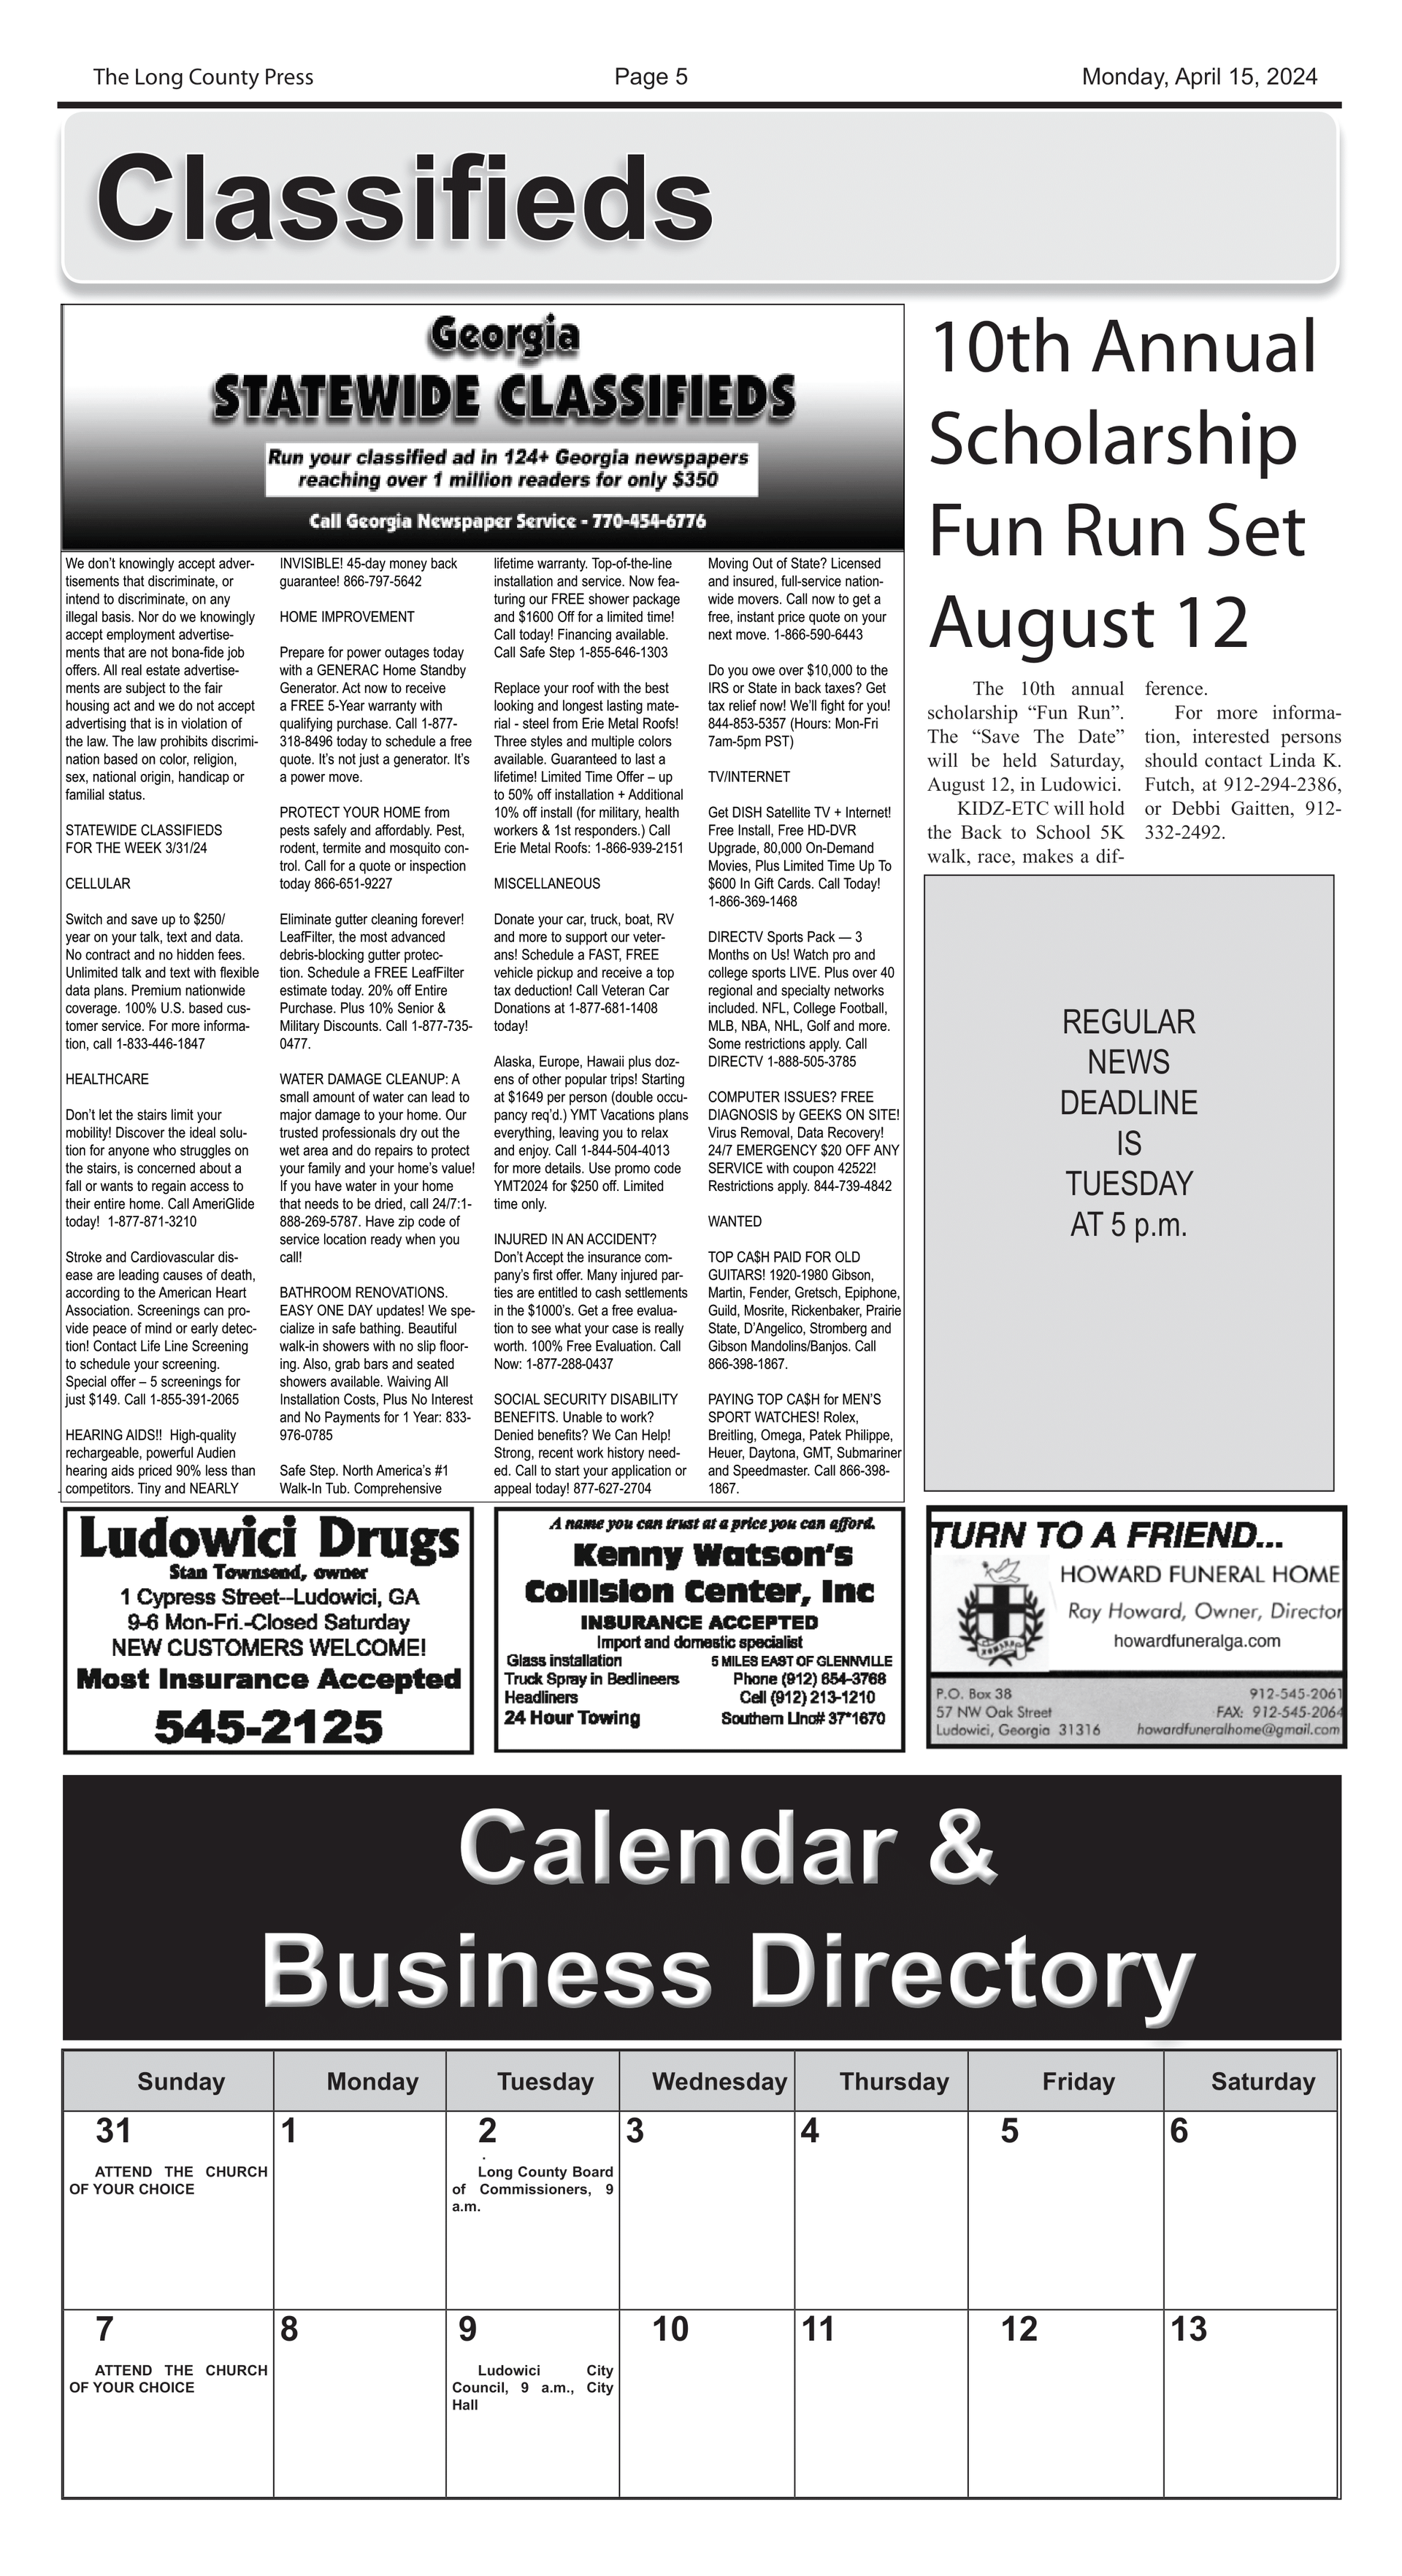 A newspaper with classifieds and a calendar and business directory